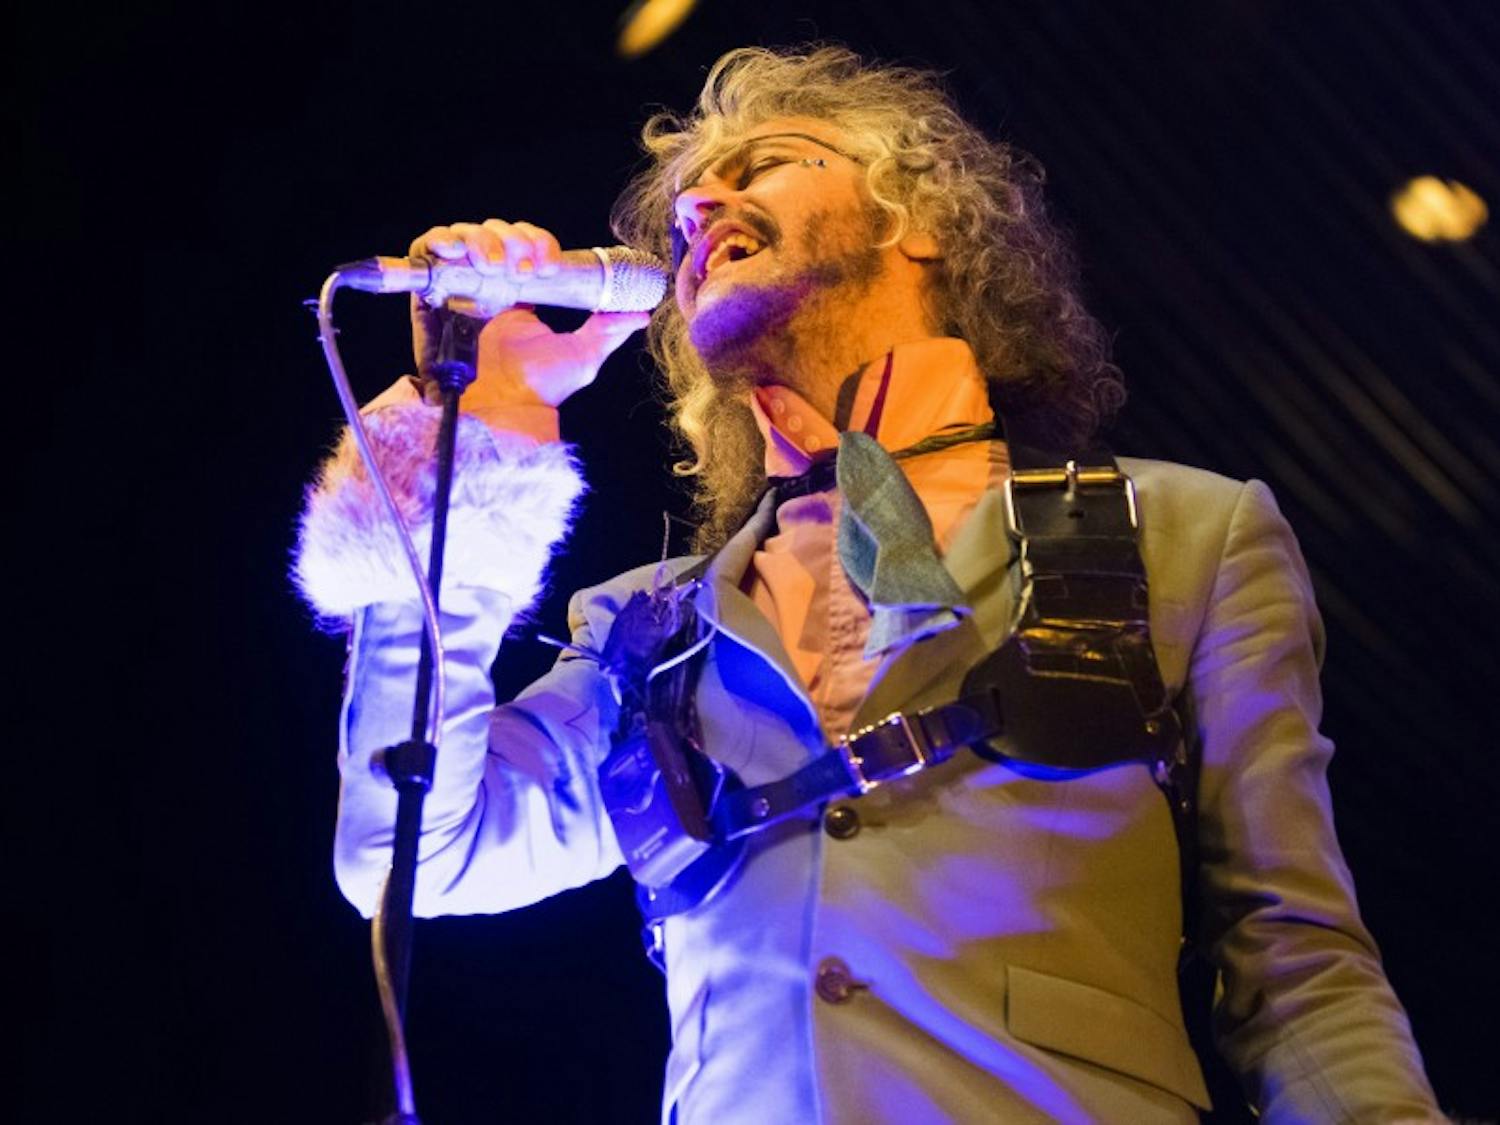 Gallery: The Flaming Lips bring their psychedelic, soulful experience to Summerfest